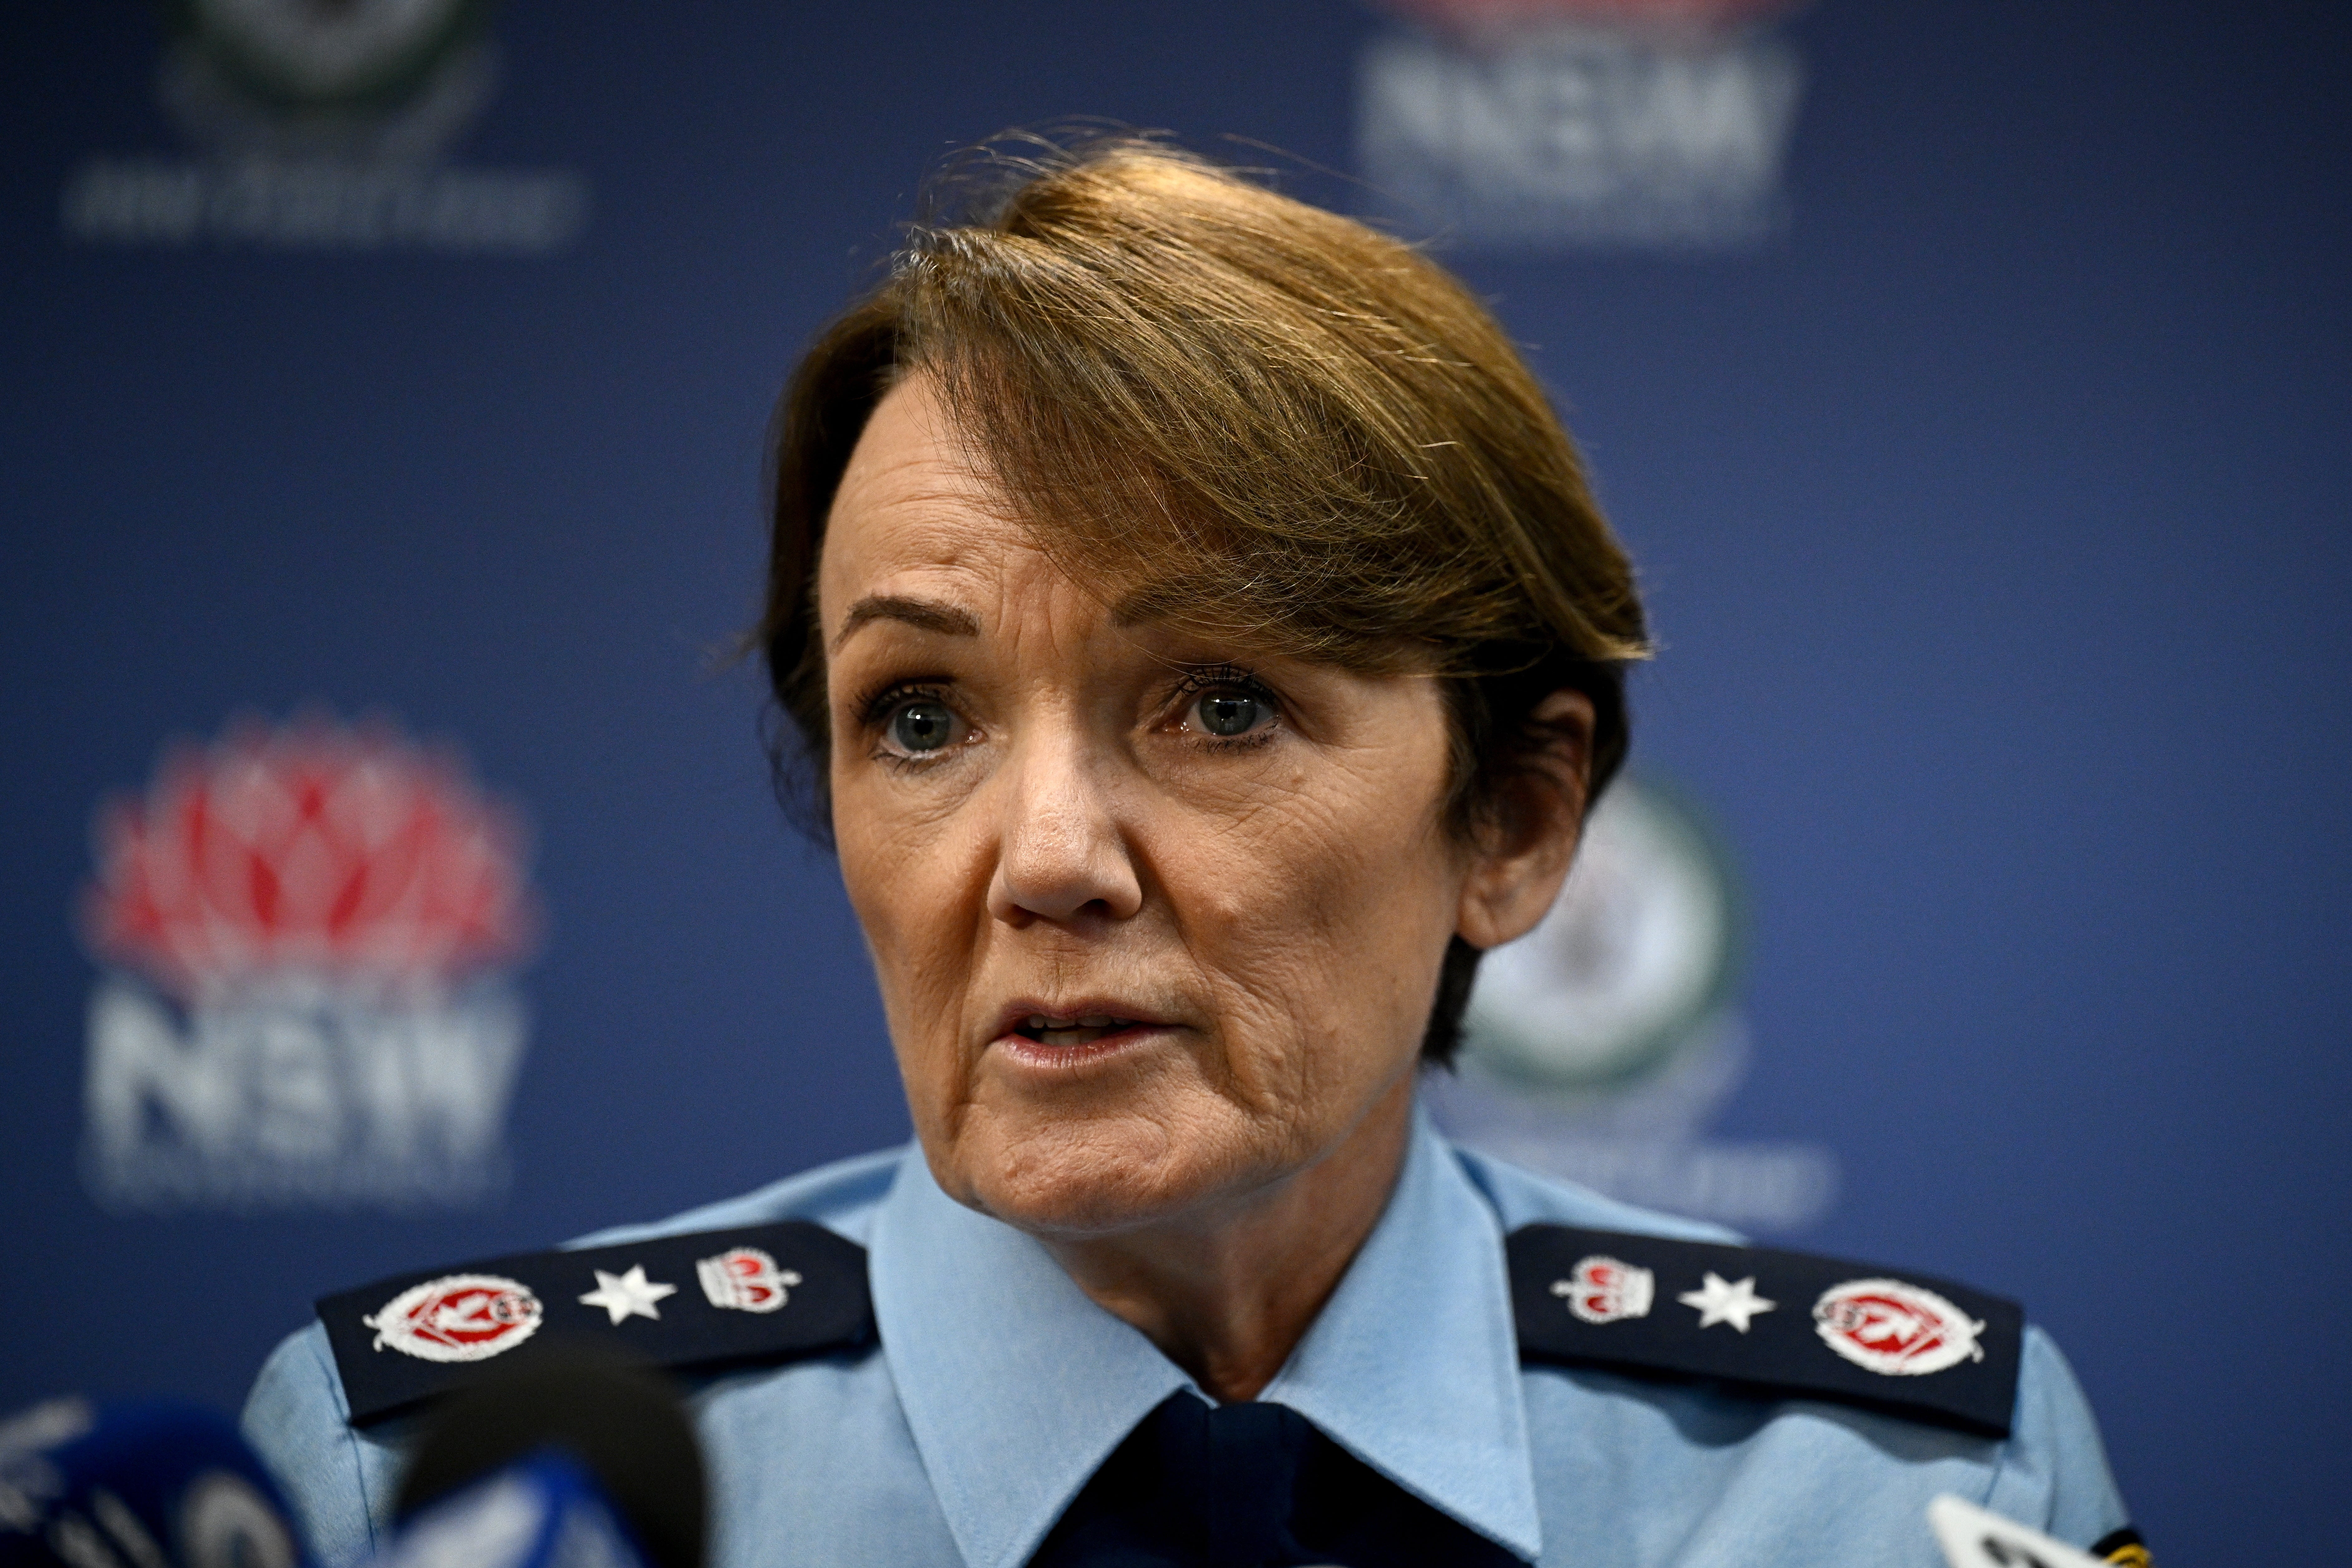 NSW Police Commissioner Karen Webb hailed members of the public for their response